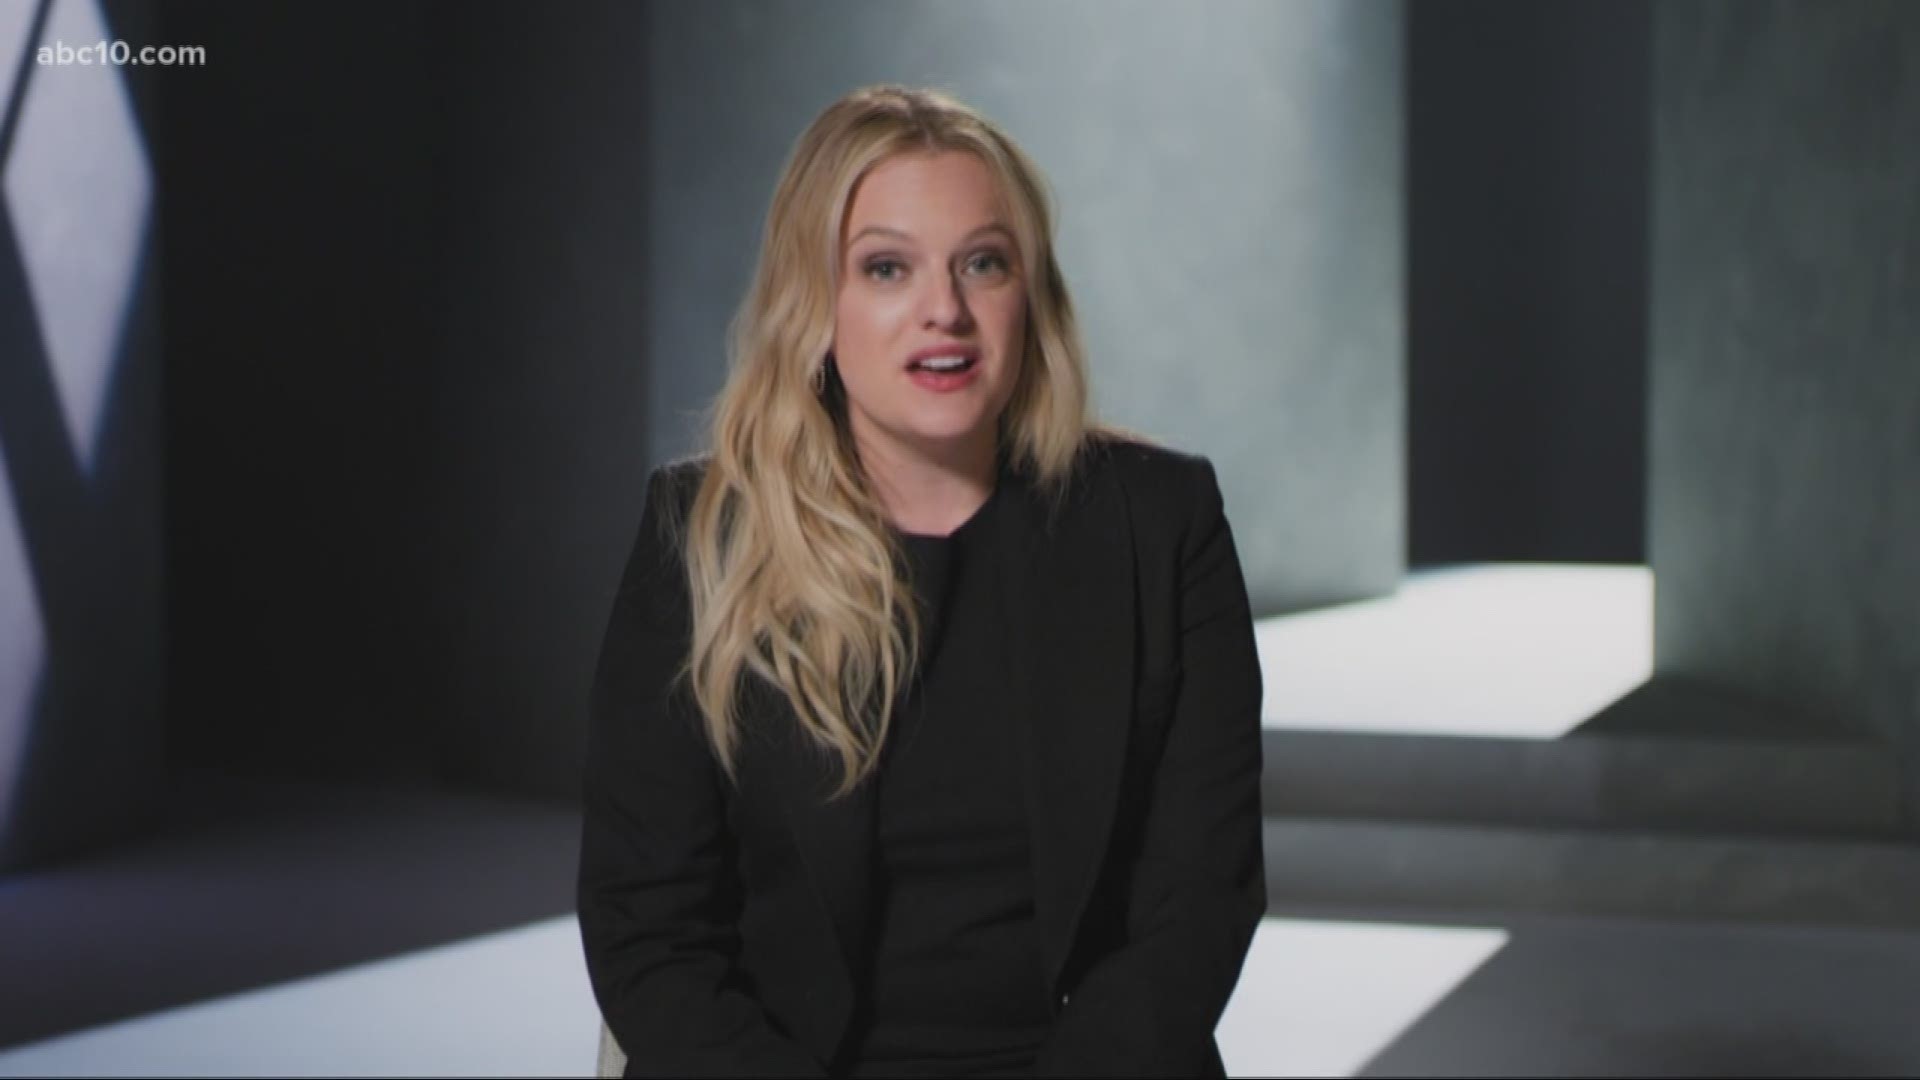 Emmy-winning actress Elizabeth Moss talks about why she took the role to star in "The Invisible Man" as well as other roles you may have seen her in.